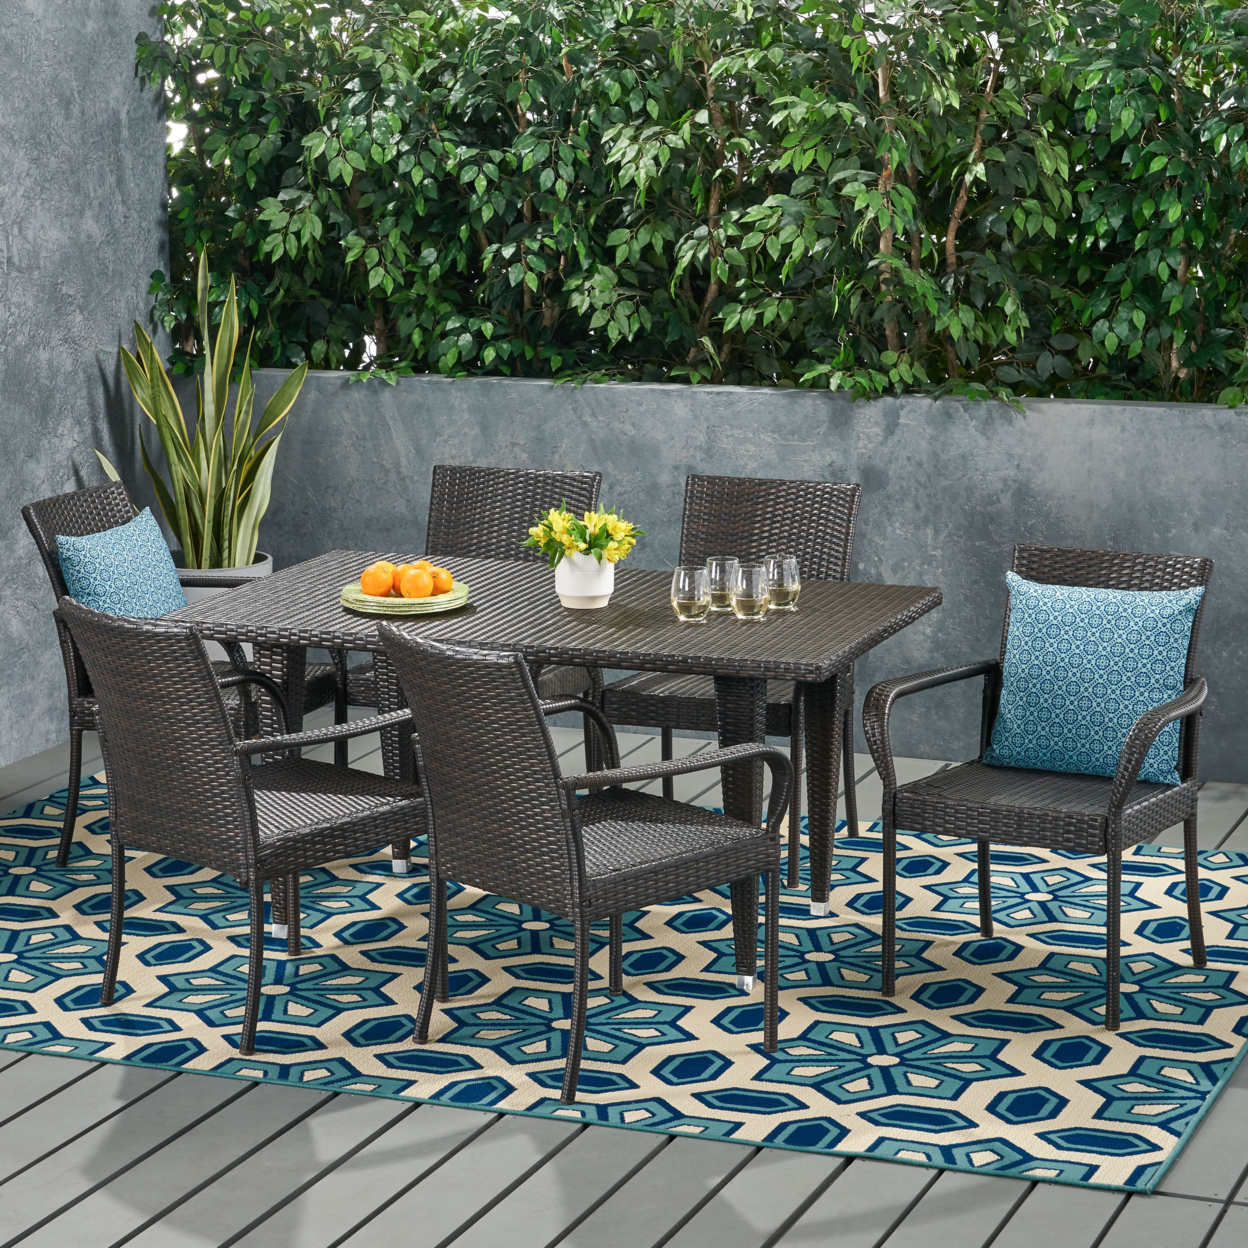 Admiral Outdoor Contemporary 6 Seater Wicker Dining Set - Multi-brown